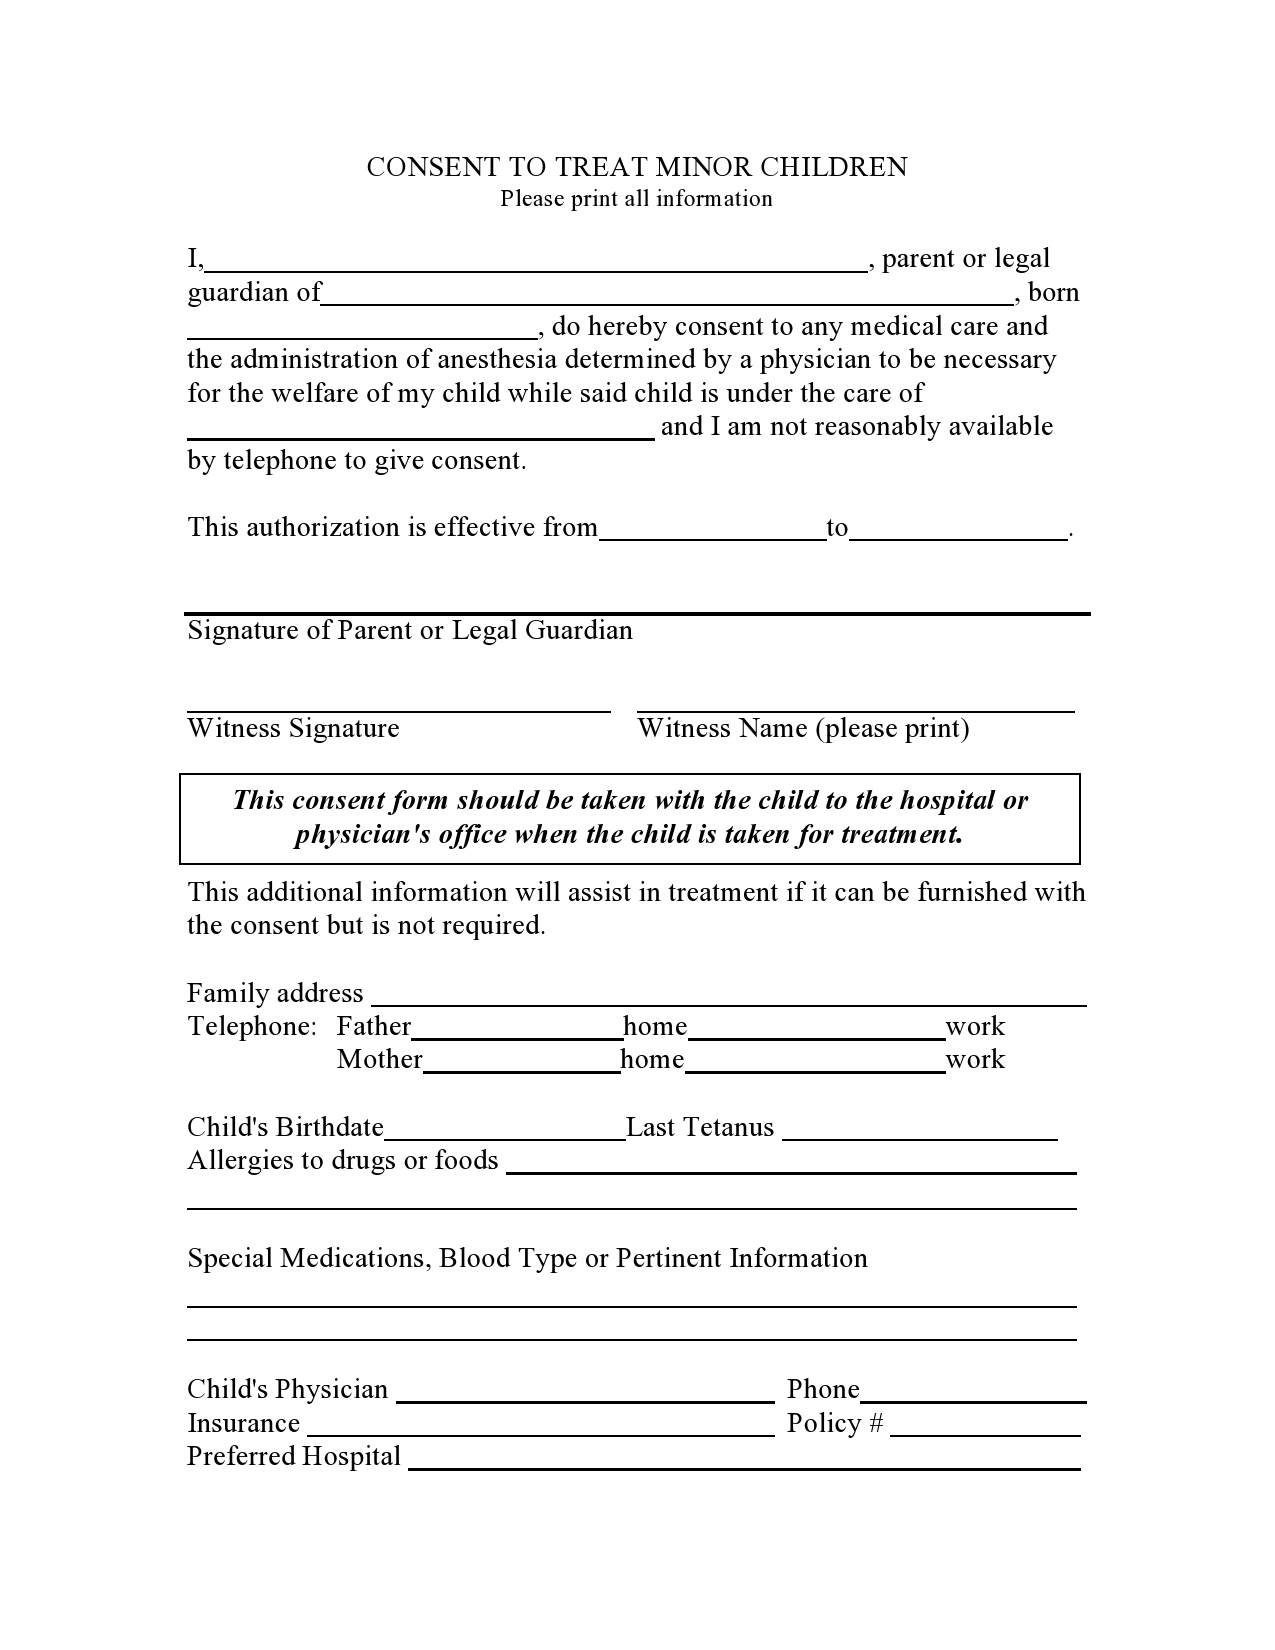 Free medical consent form for minor 01